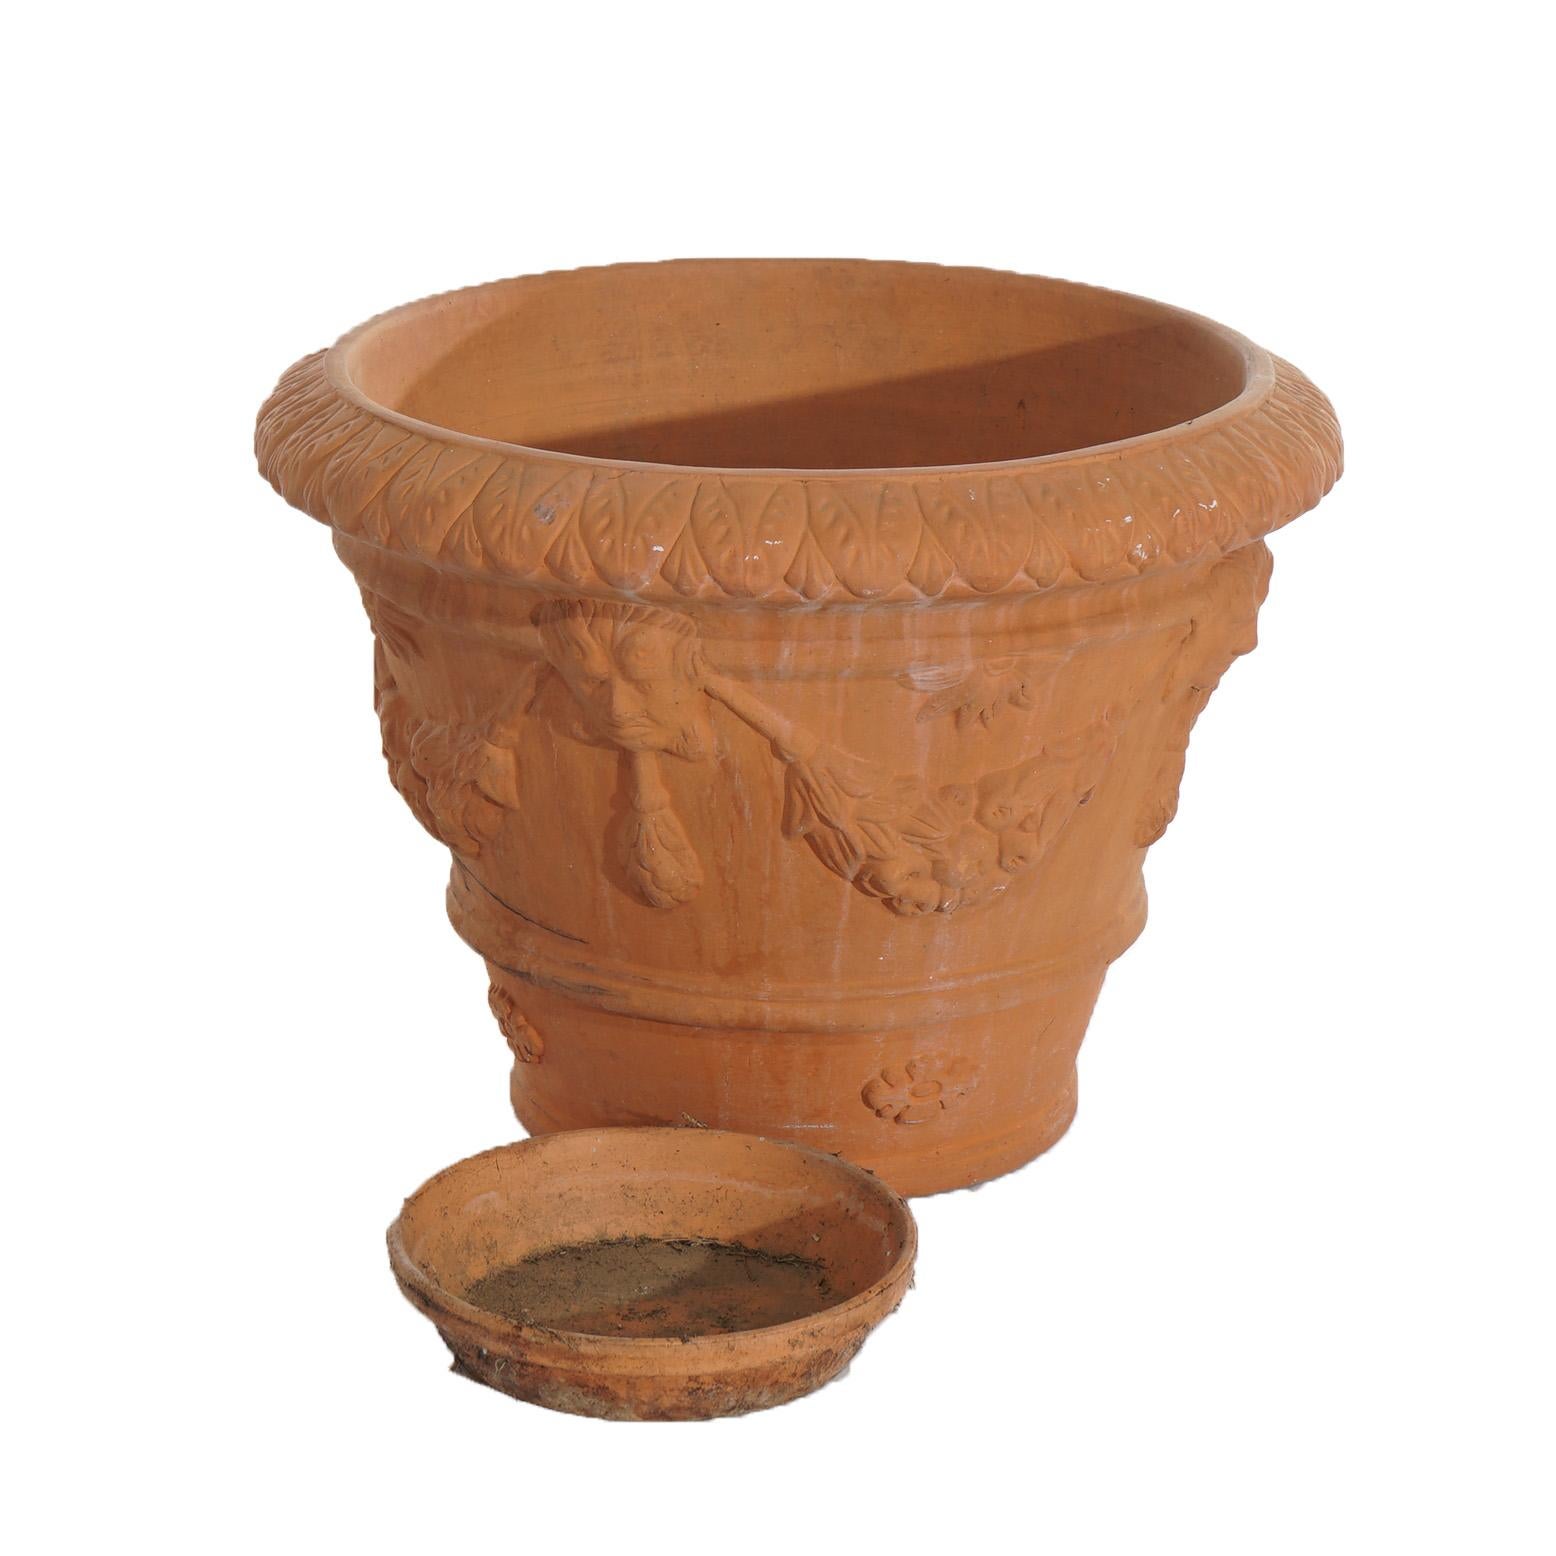 Cast Classical Terracotta Pottery Jardiniere with Figural Masks & Fruit Swag 20th C For Sale